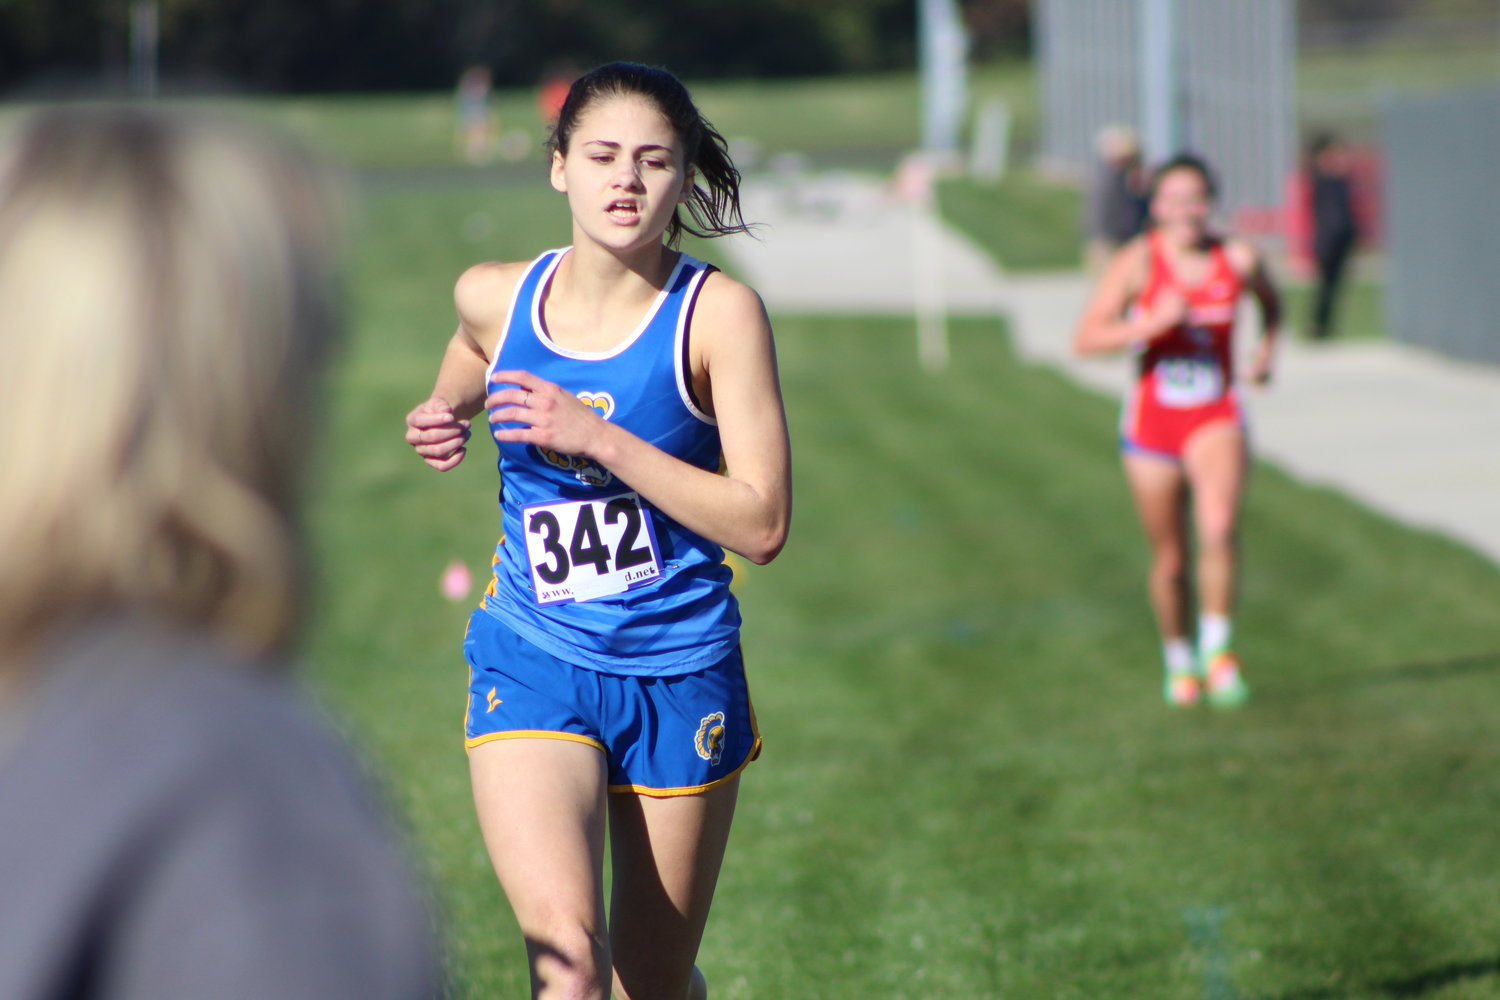 Crawfordsville's Sophia Melevage raced to a 4th place finish in the girls race.